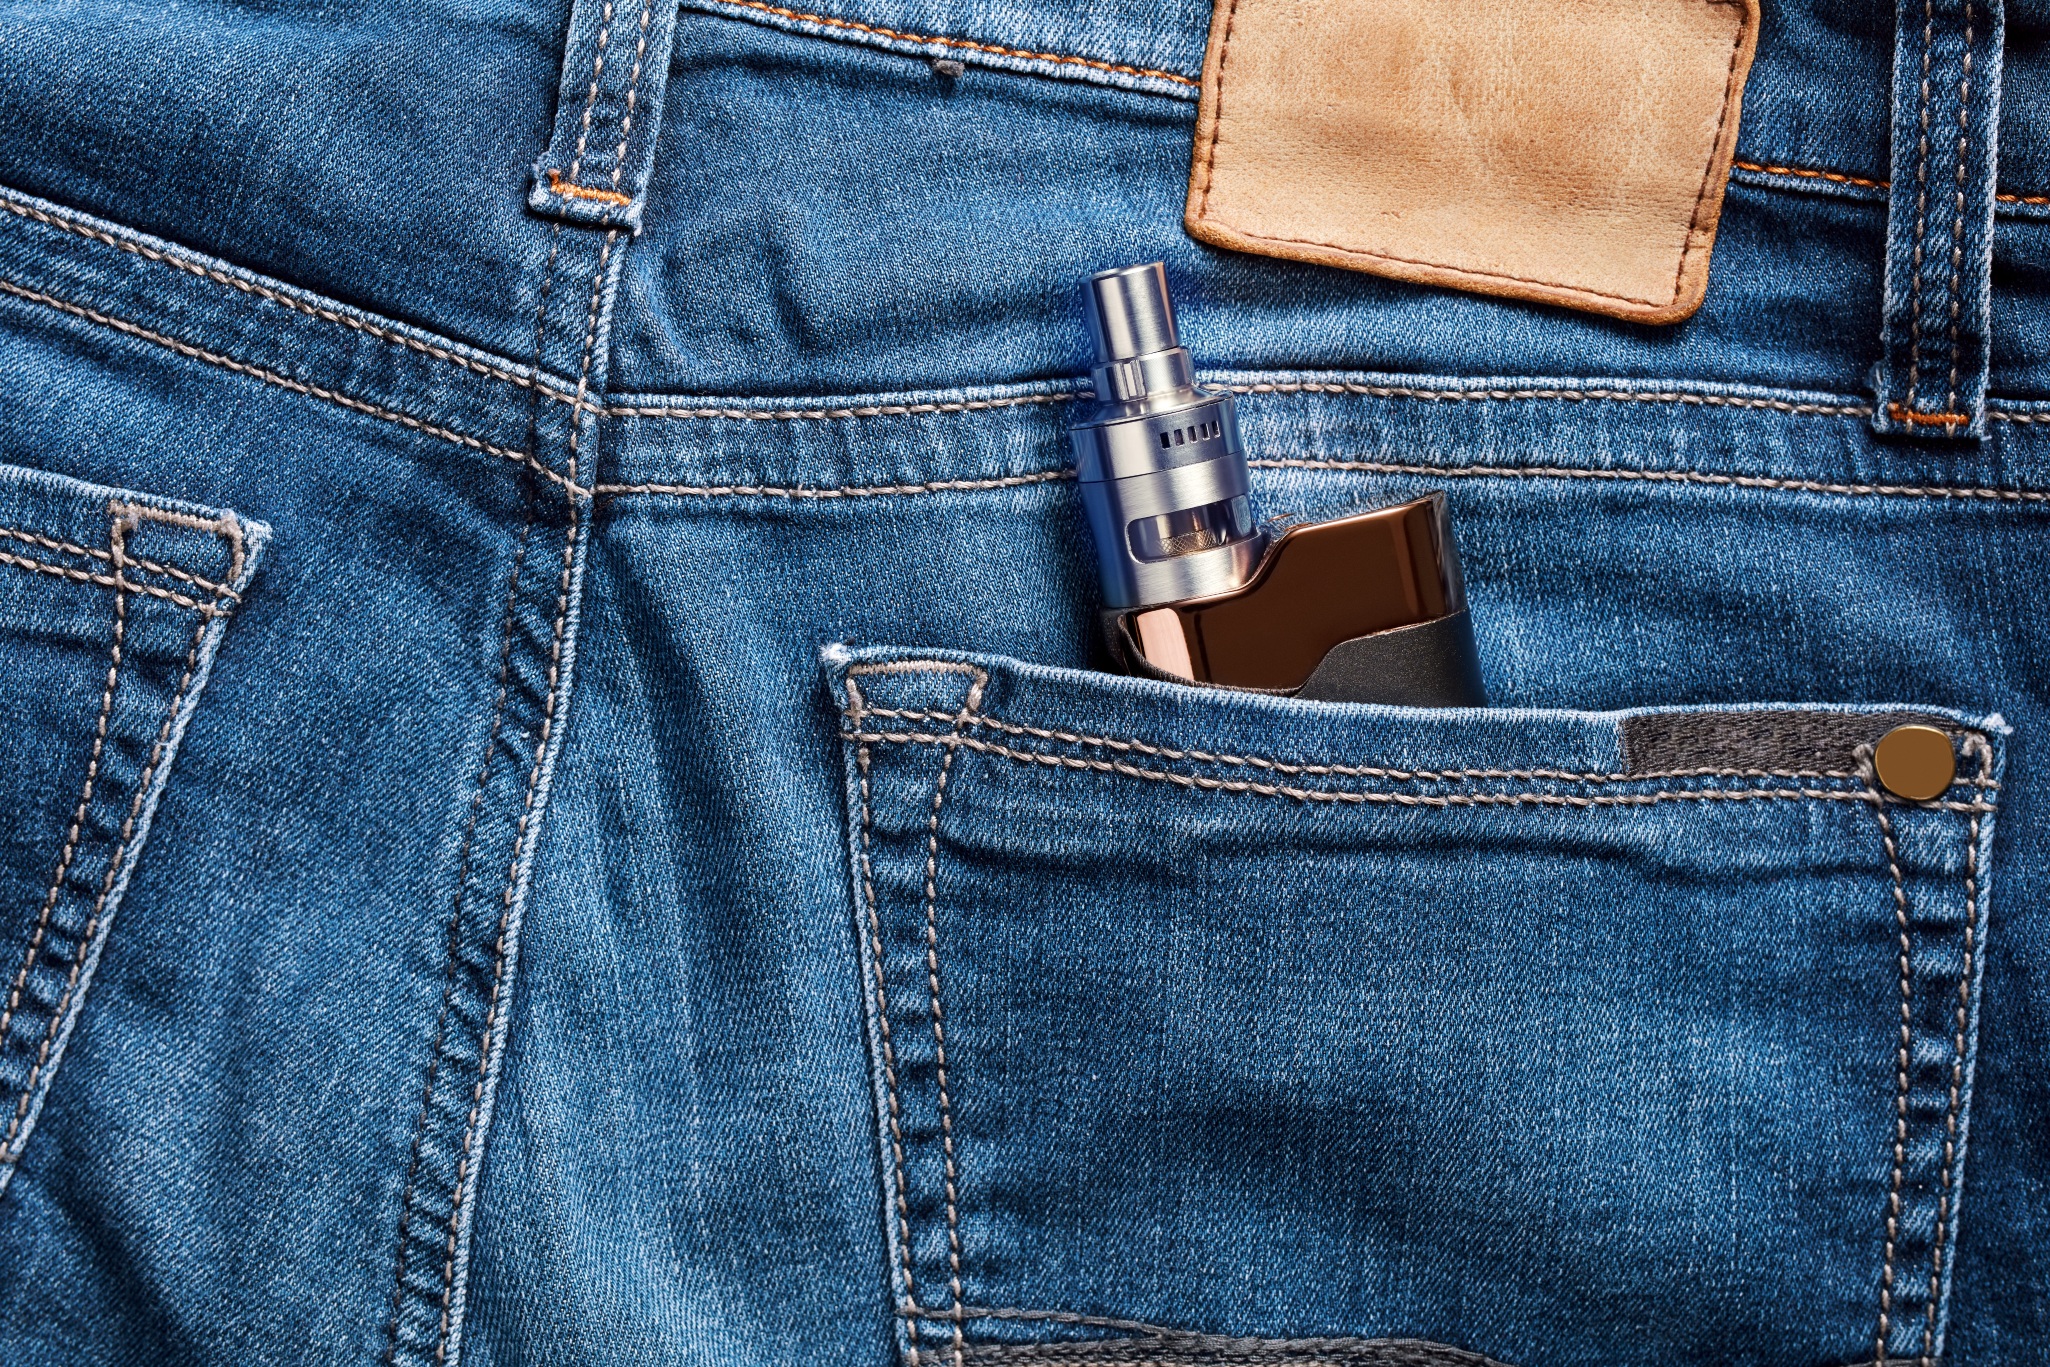 Vape with lithium battery in jeans pocket